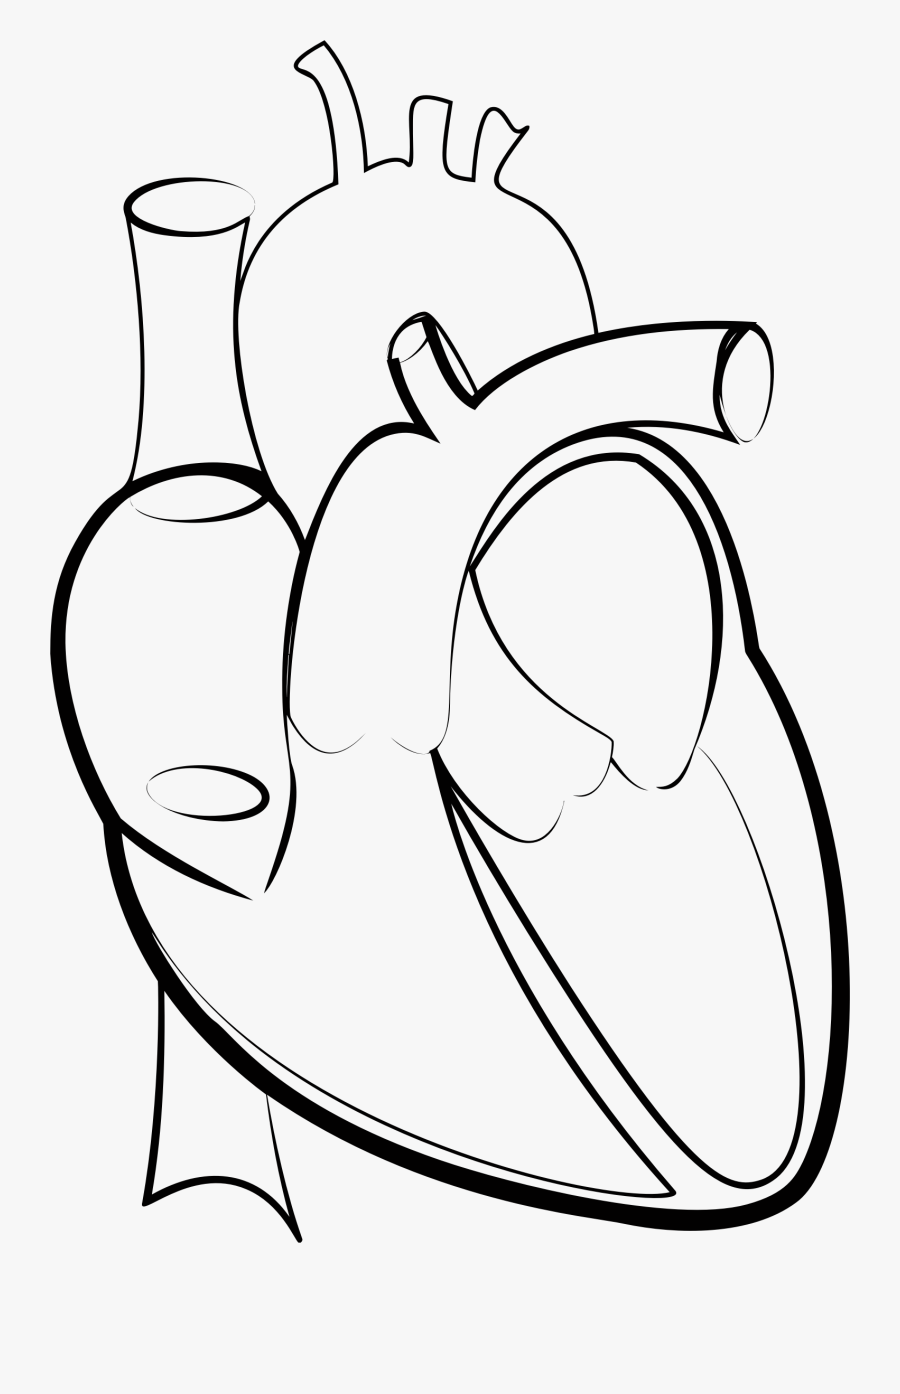 Black & White Line Drawing Of Two Love Heart Shapes - Human Heart Line Art Png, Transparent Clipart